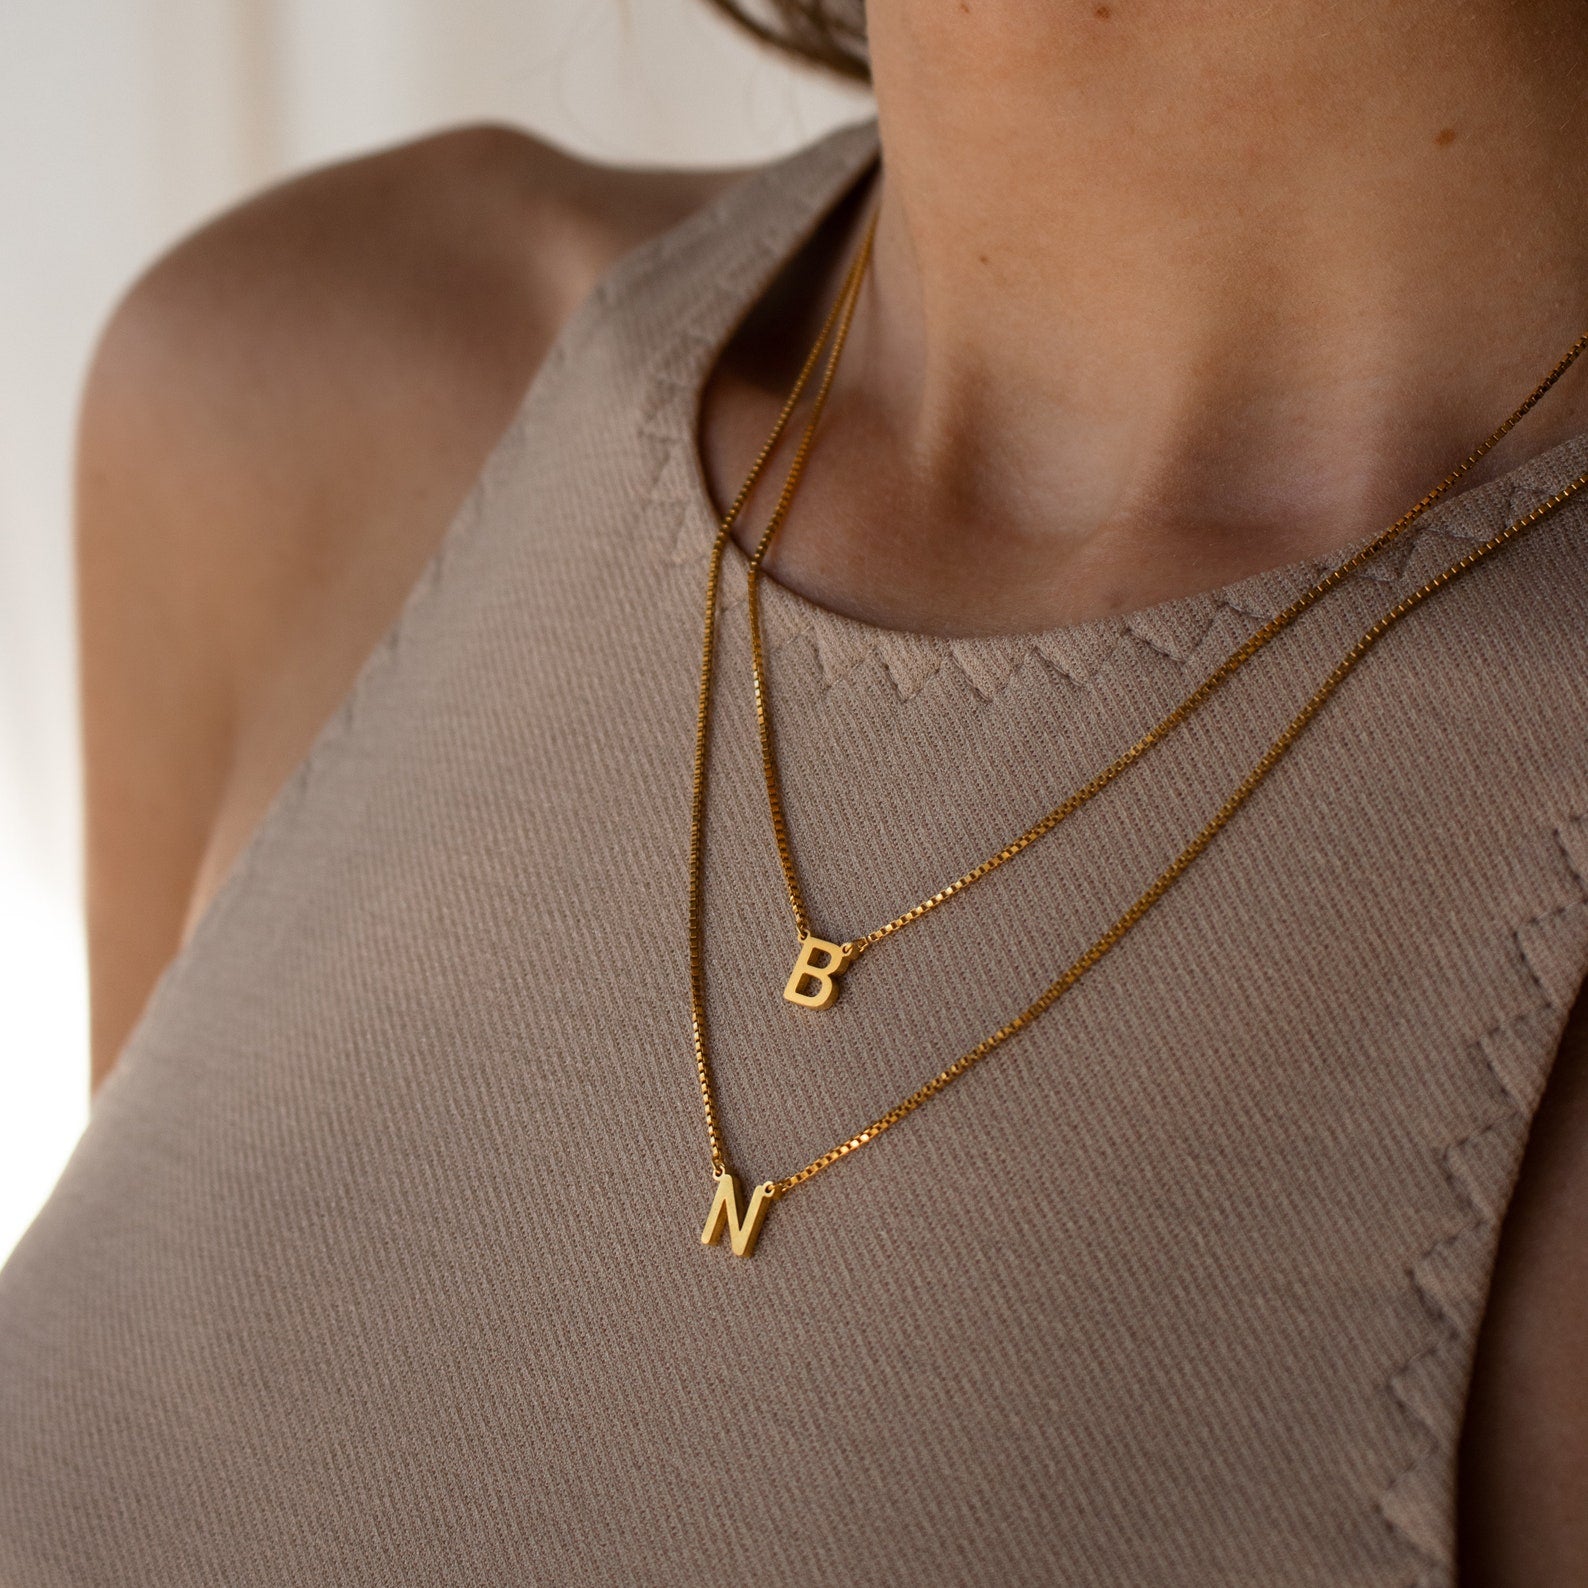 Double Initial Necklace